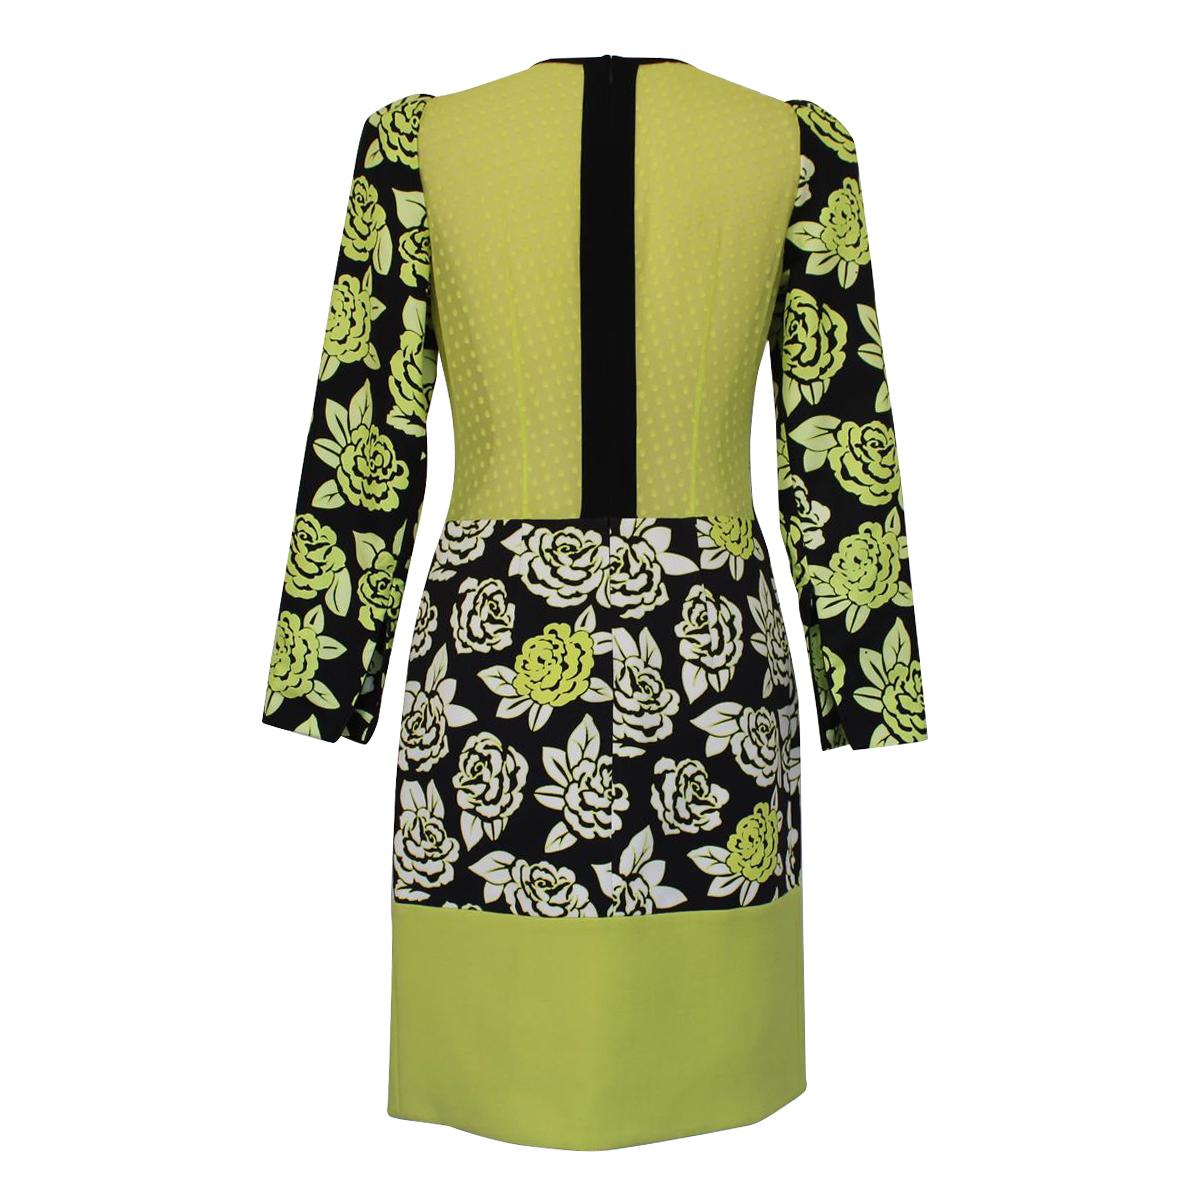 Fantastic Versace dress
Rayon (97%) Other fibers
Black and fluorescent green color
Floral fancy
Long sleeves
Total length cm 95 (37.4 inches)
Shoulder cm 35 (13.7 inches)
Worldwide express shipping included in the price !